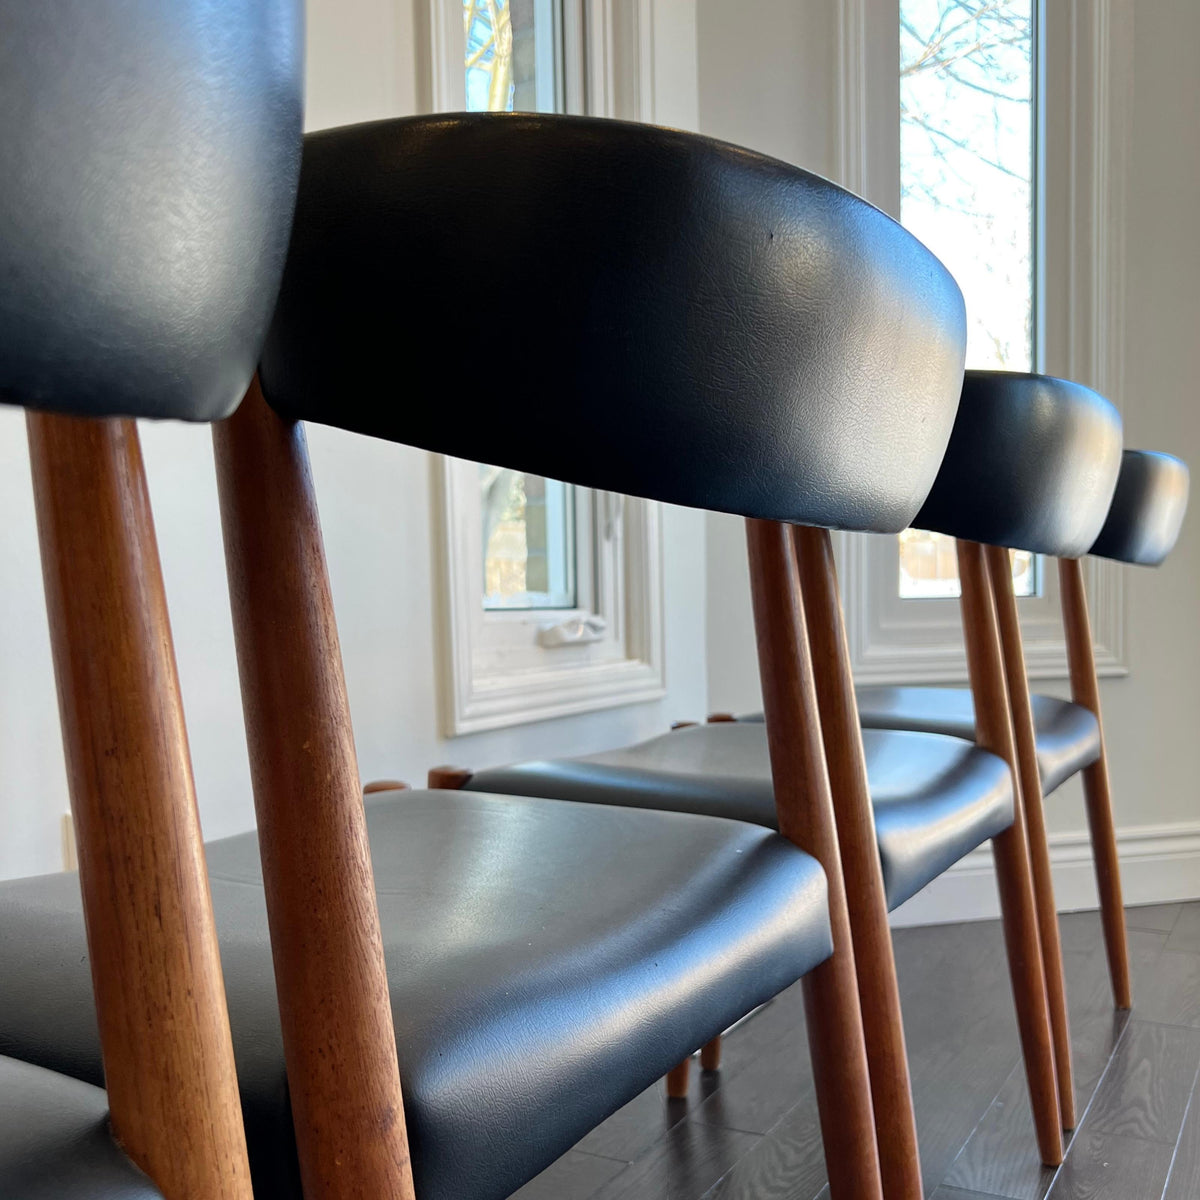 Danish Teak and Leather Dining Chairs